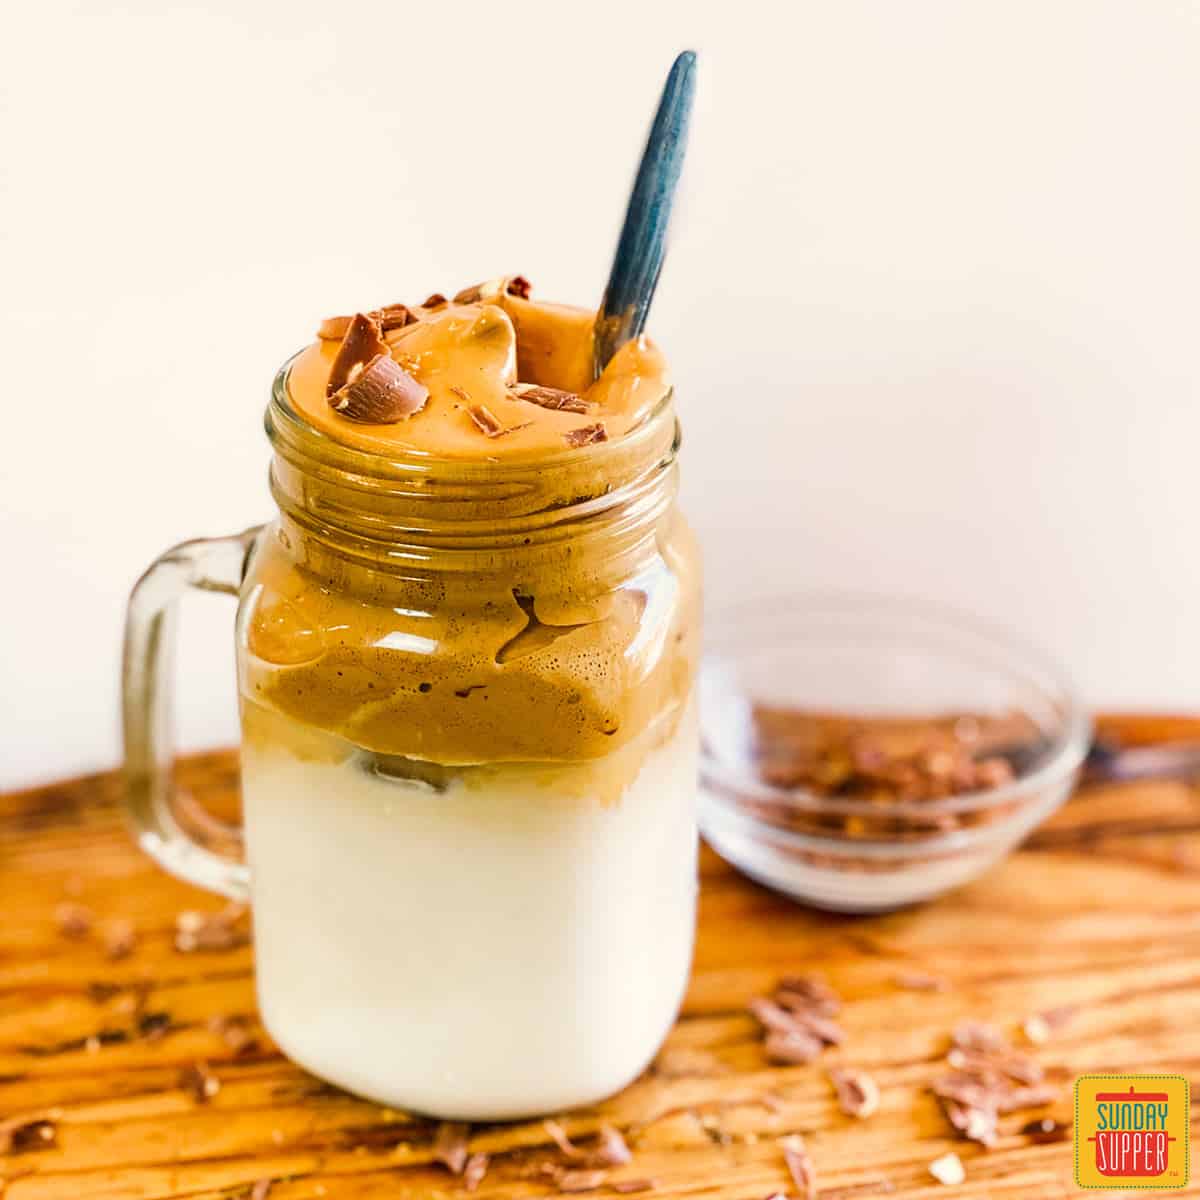 Whipped coffee in a glass jar on a cutting board